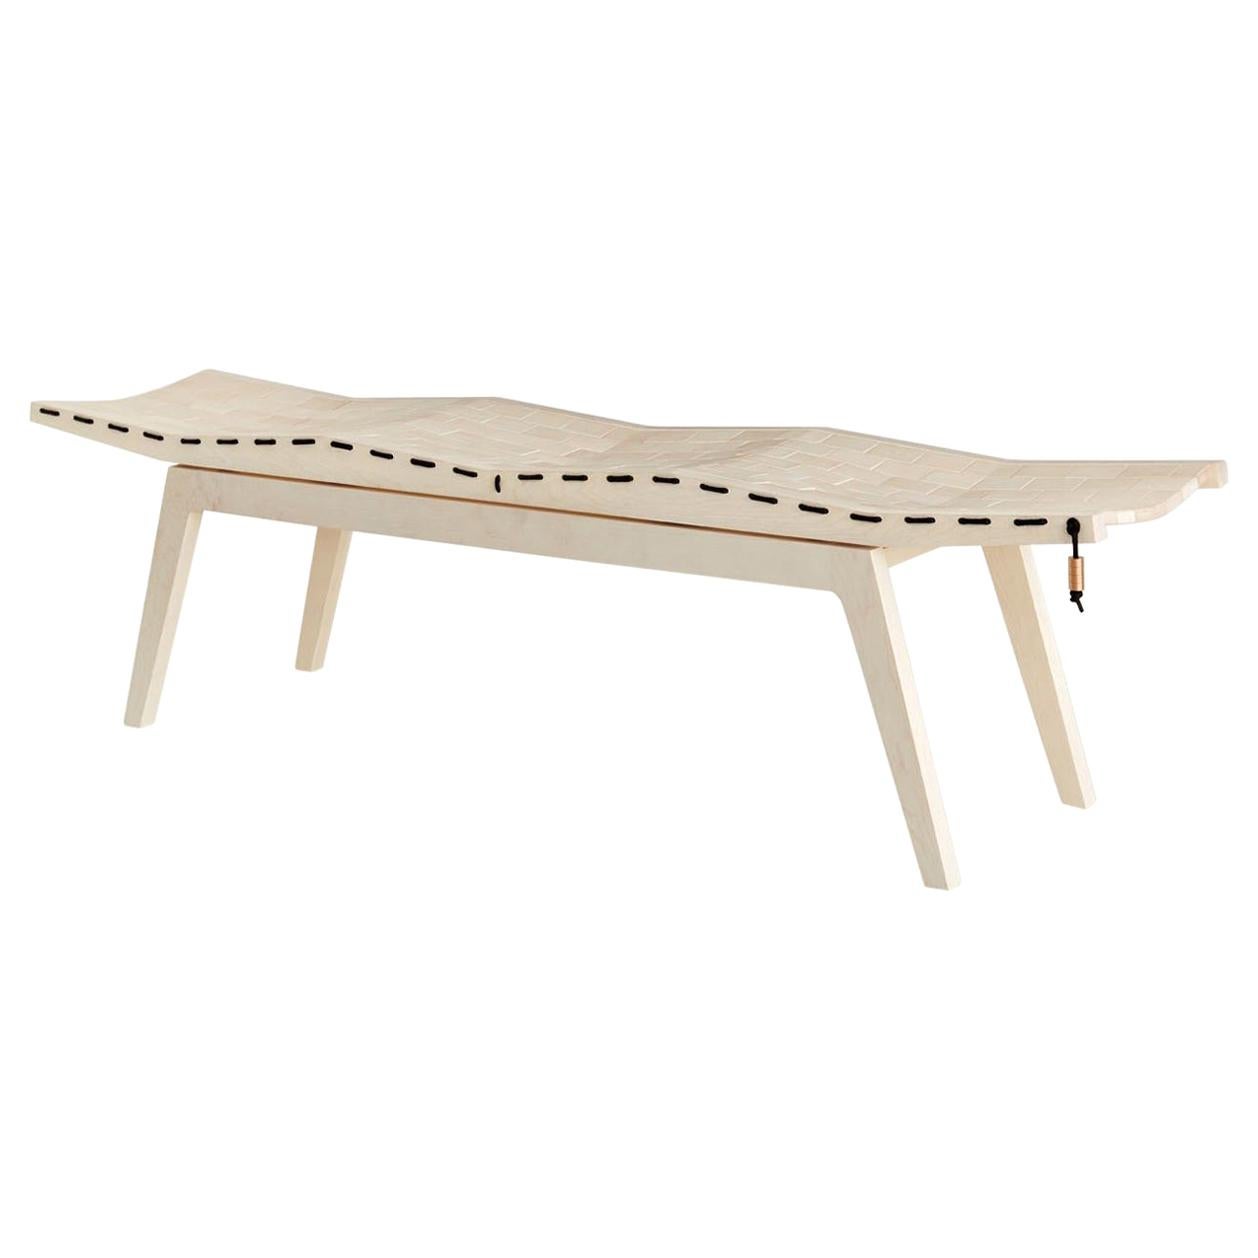 WOODSPORT Benches